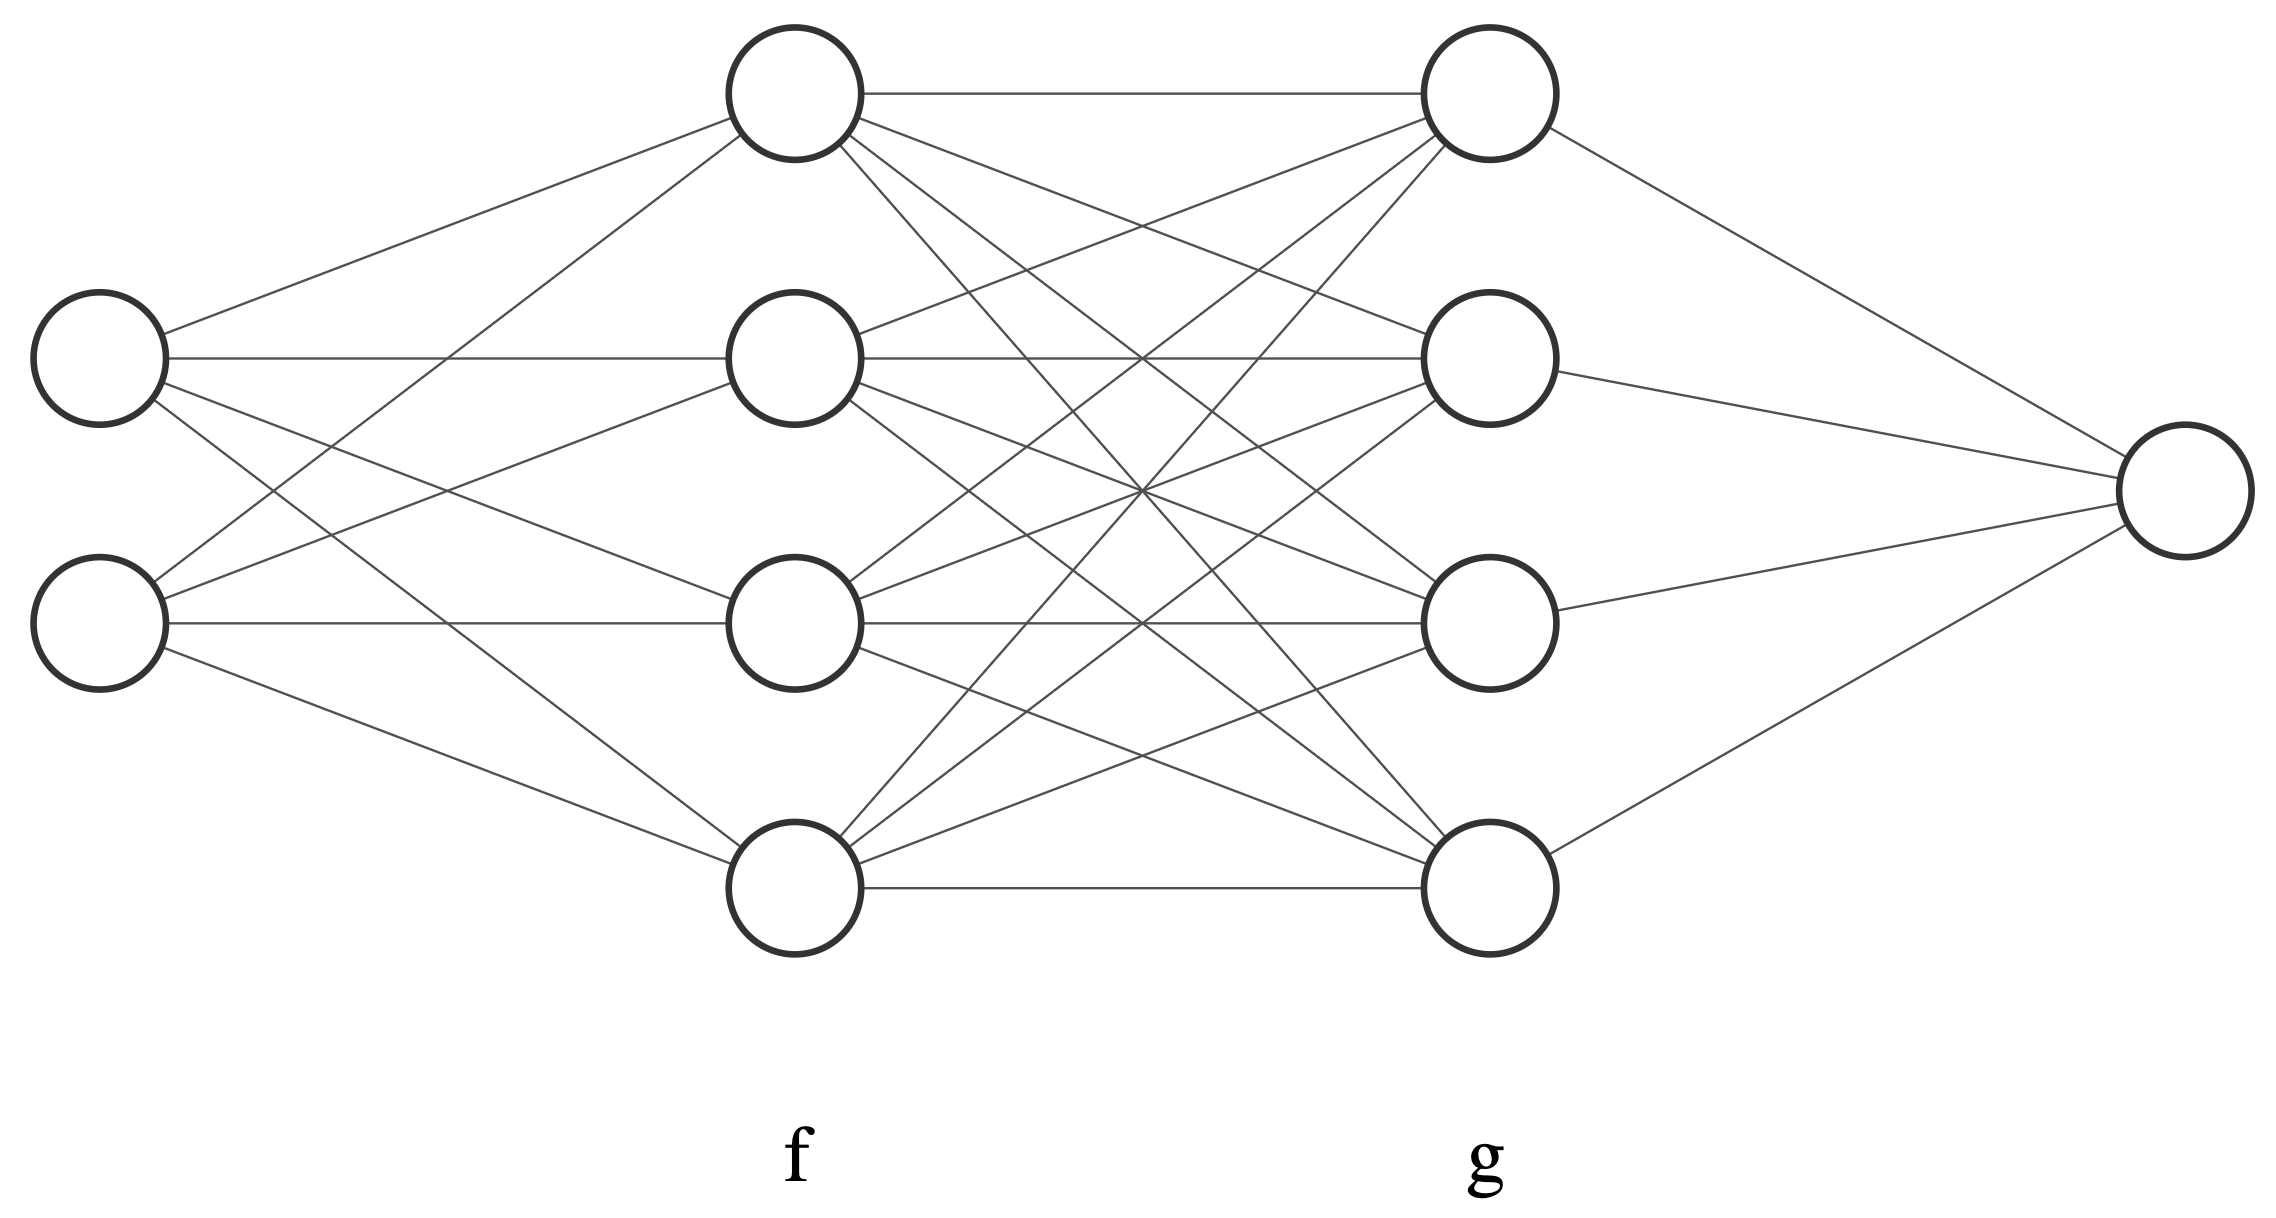 A neural network with two hidden layers f and g